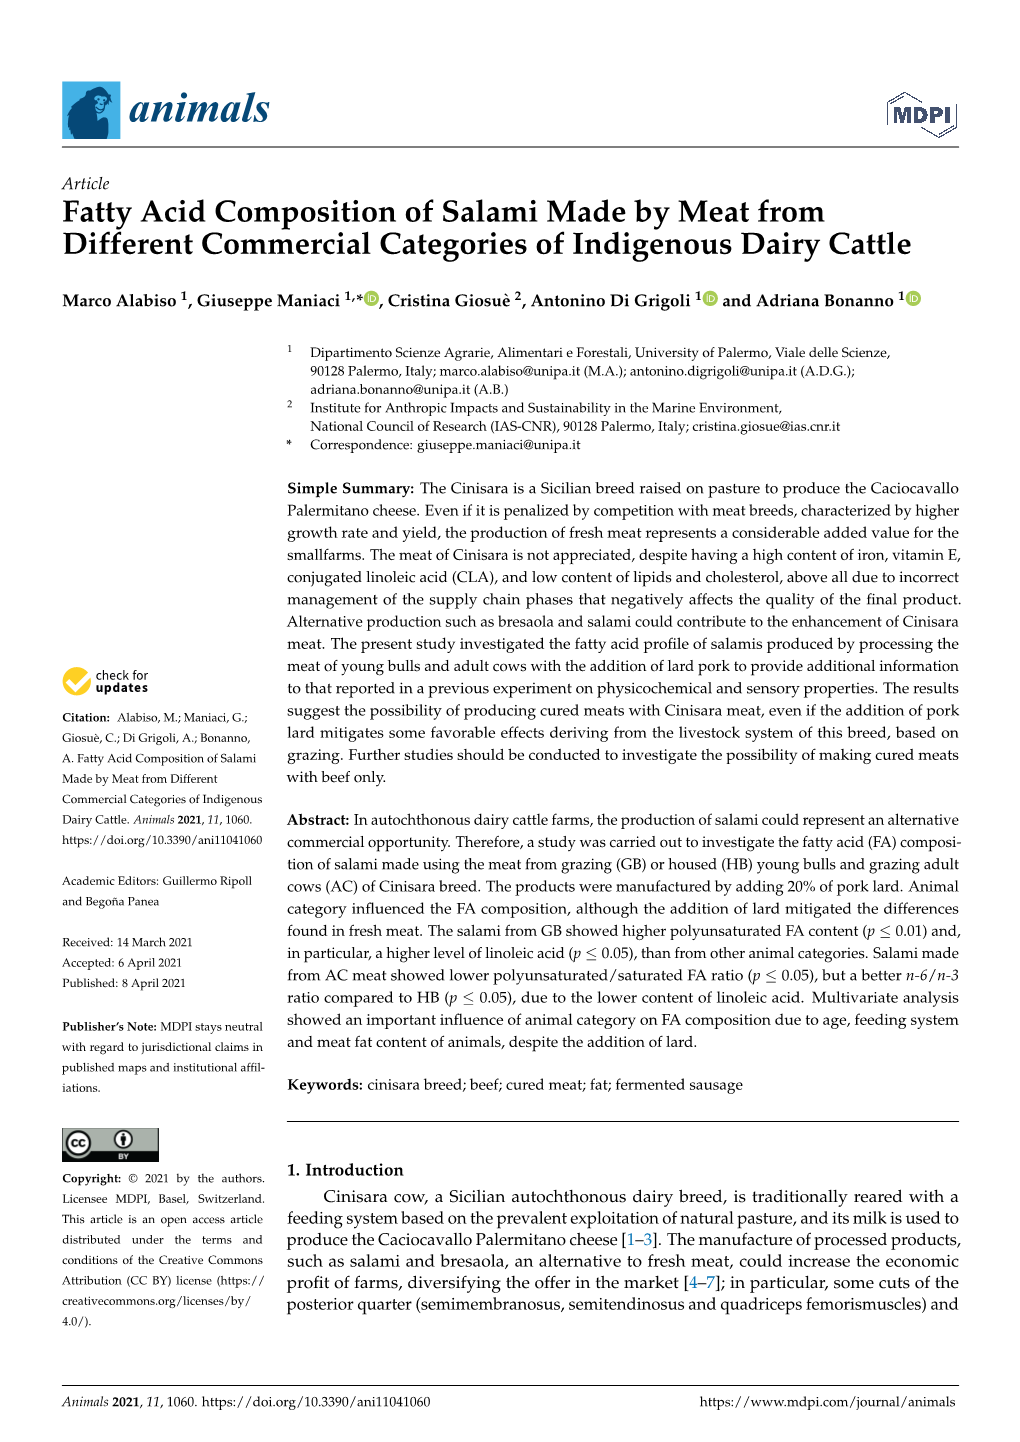 Fatty Acid Composition of Salami Made by Meat from Different Commercial Categories of Indigenous Dairy Cattle